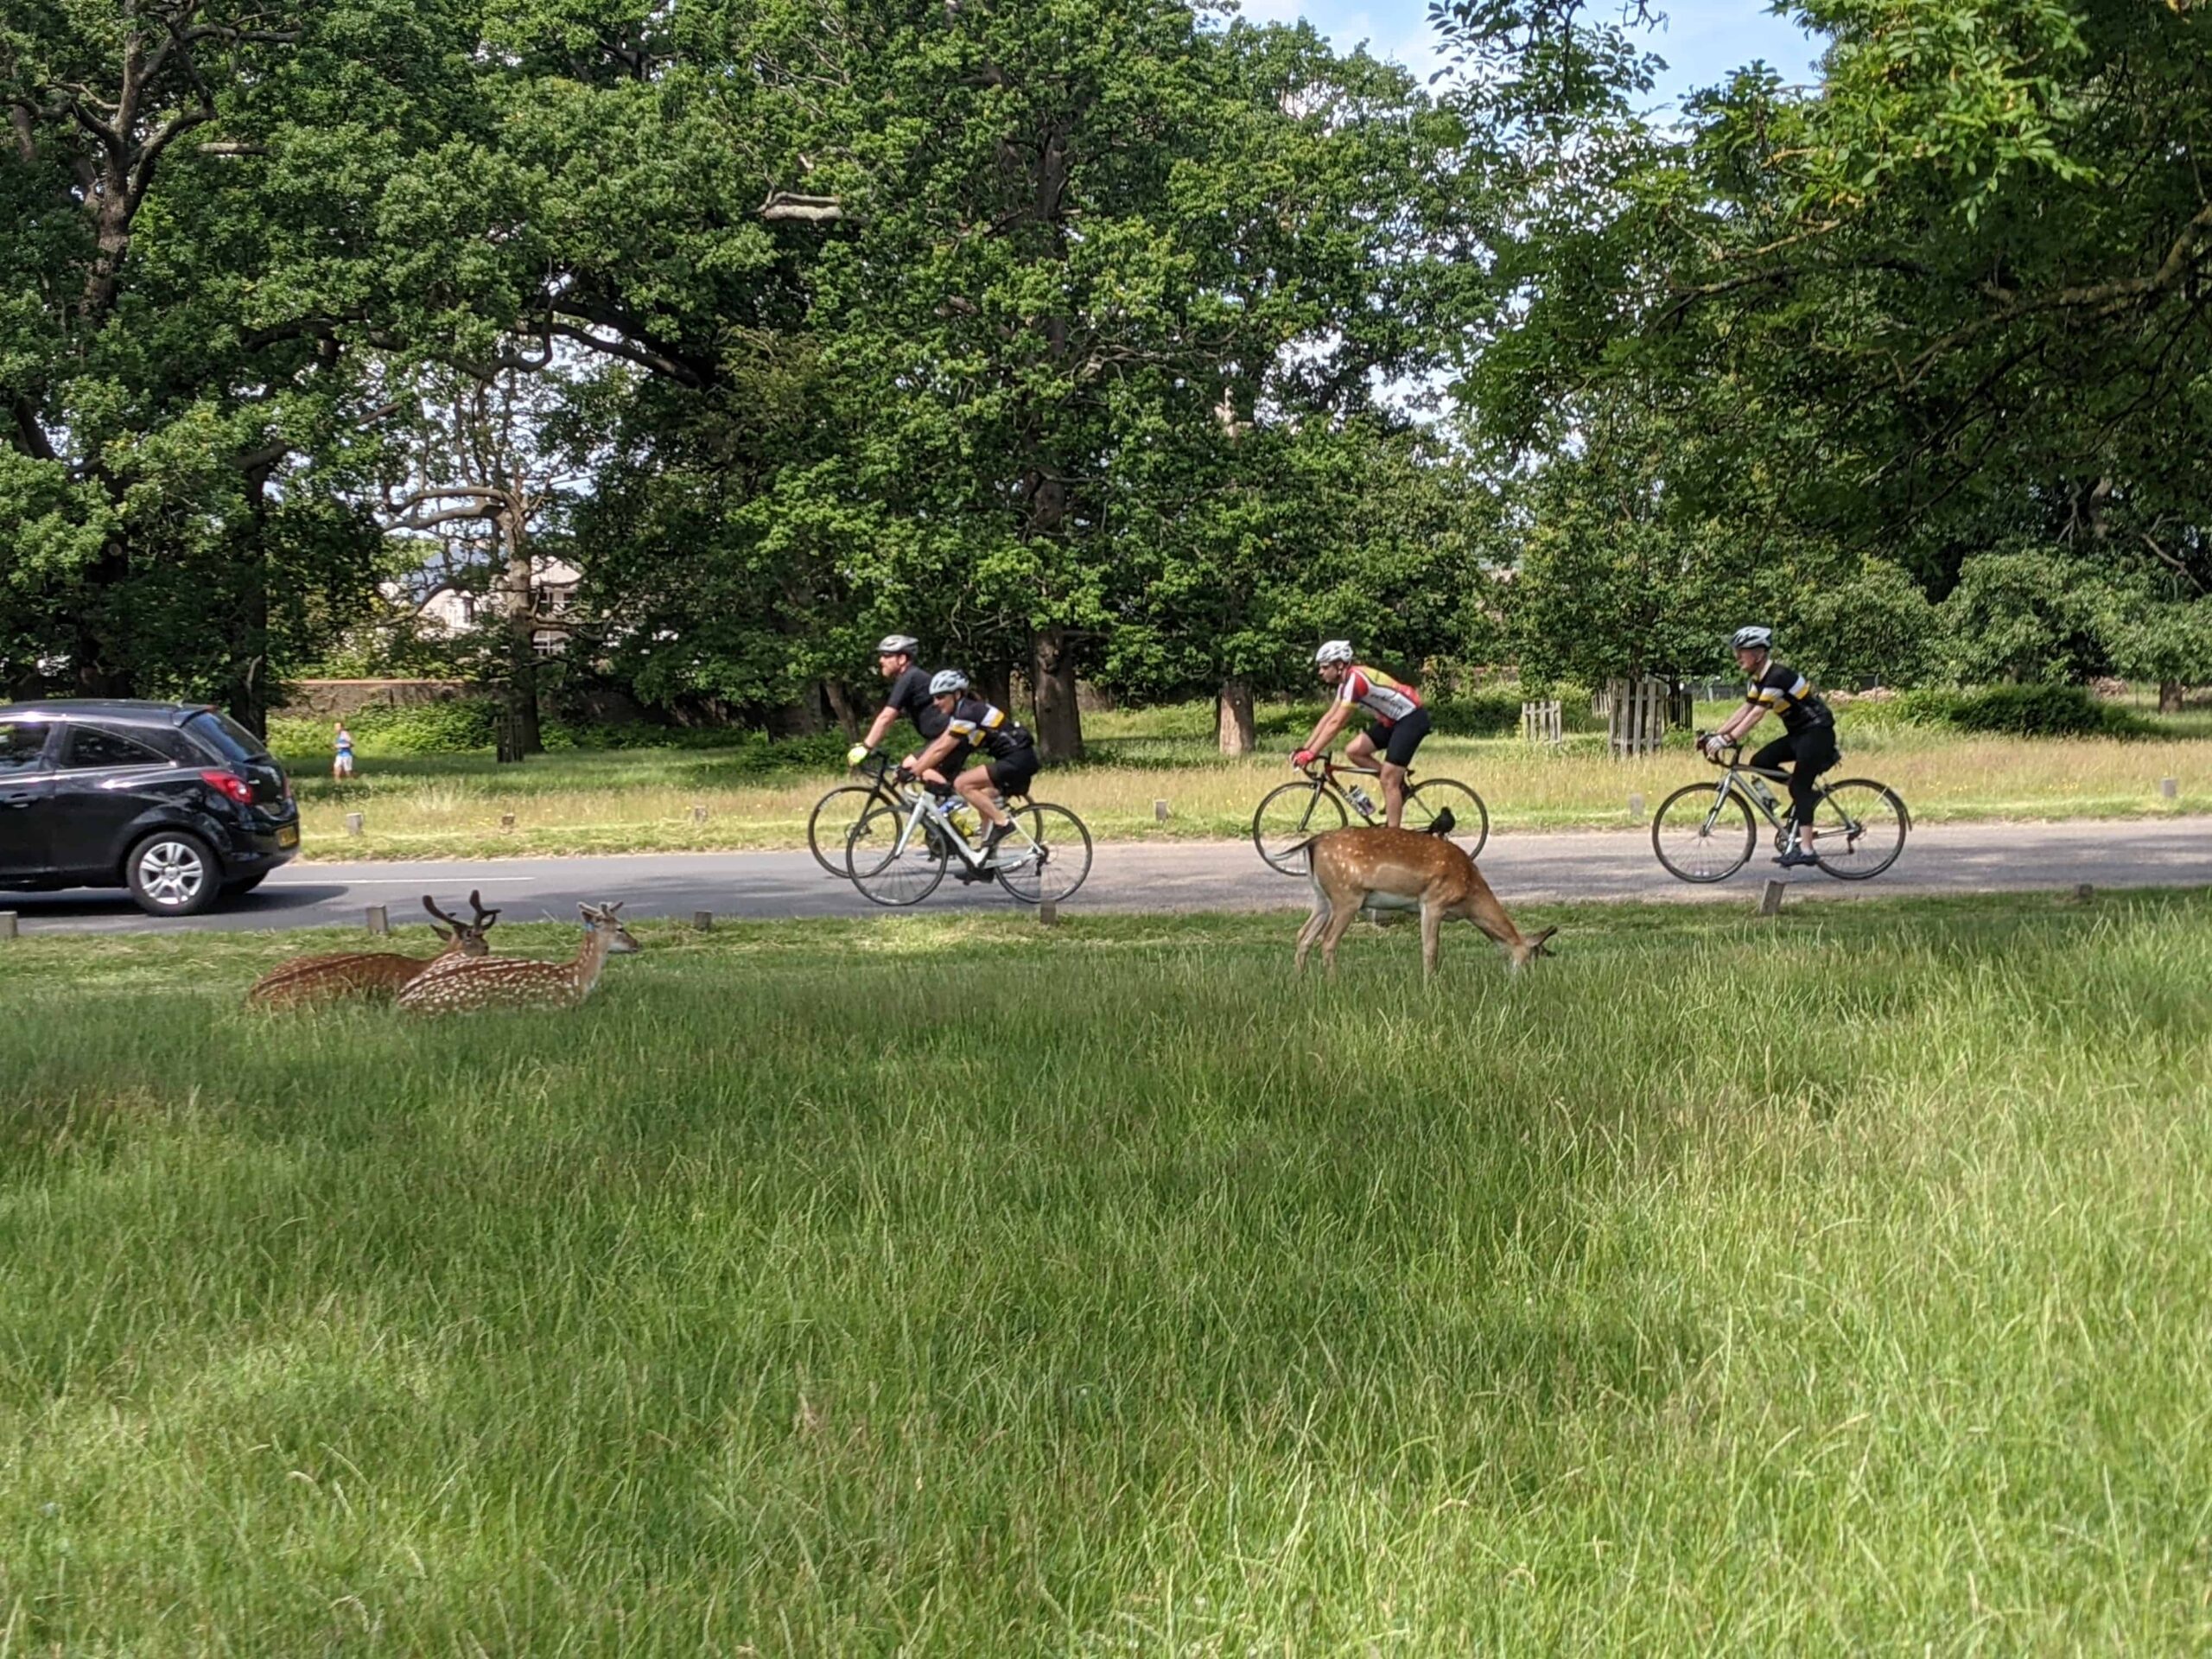 Deer and cyclists in Richmond Park (photo: Steve Cleverdon)